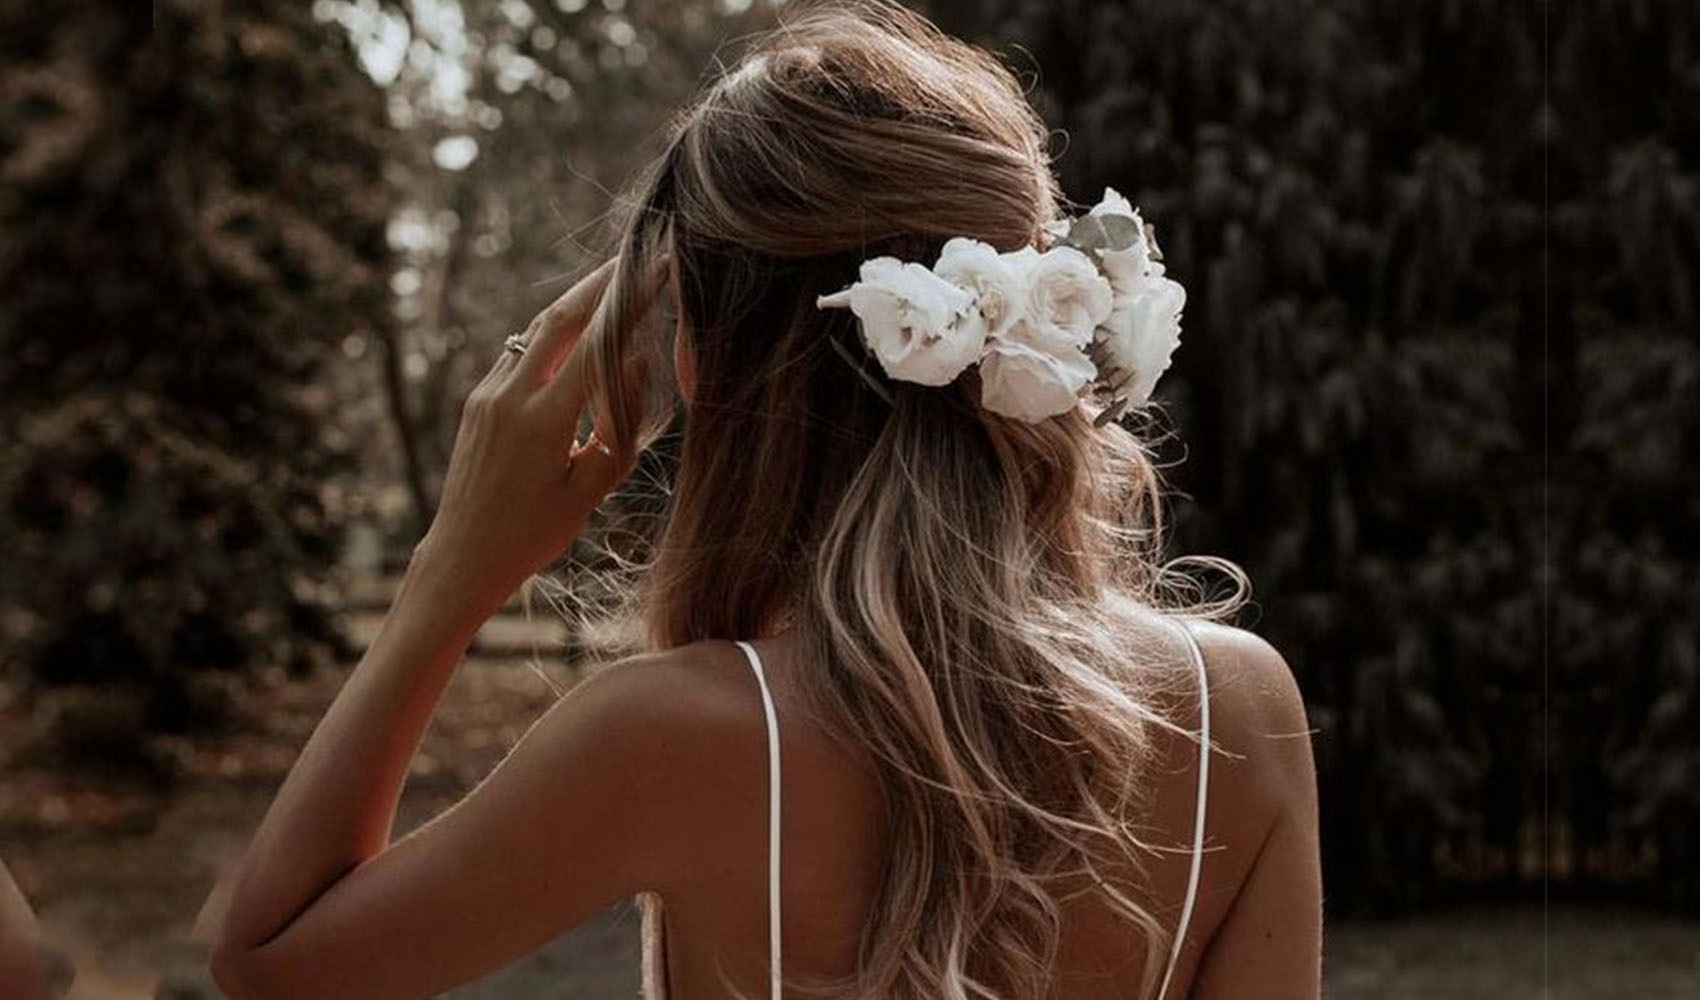 We Asked A Wedding Pro For Her Best Bridal Hair Tips - Molly Sims